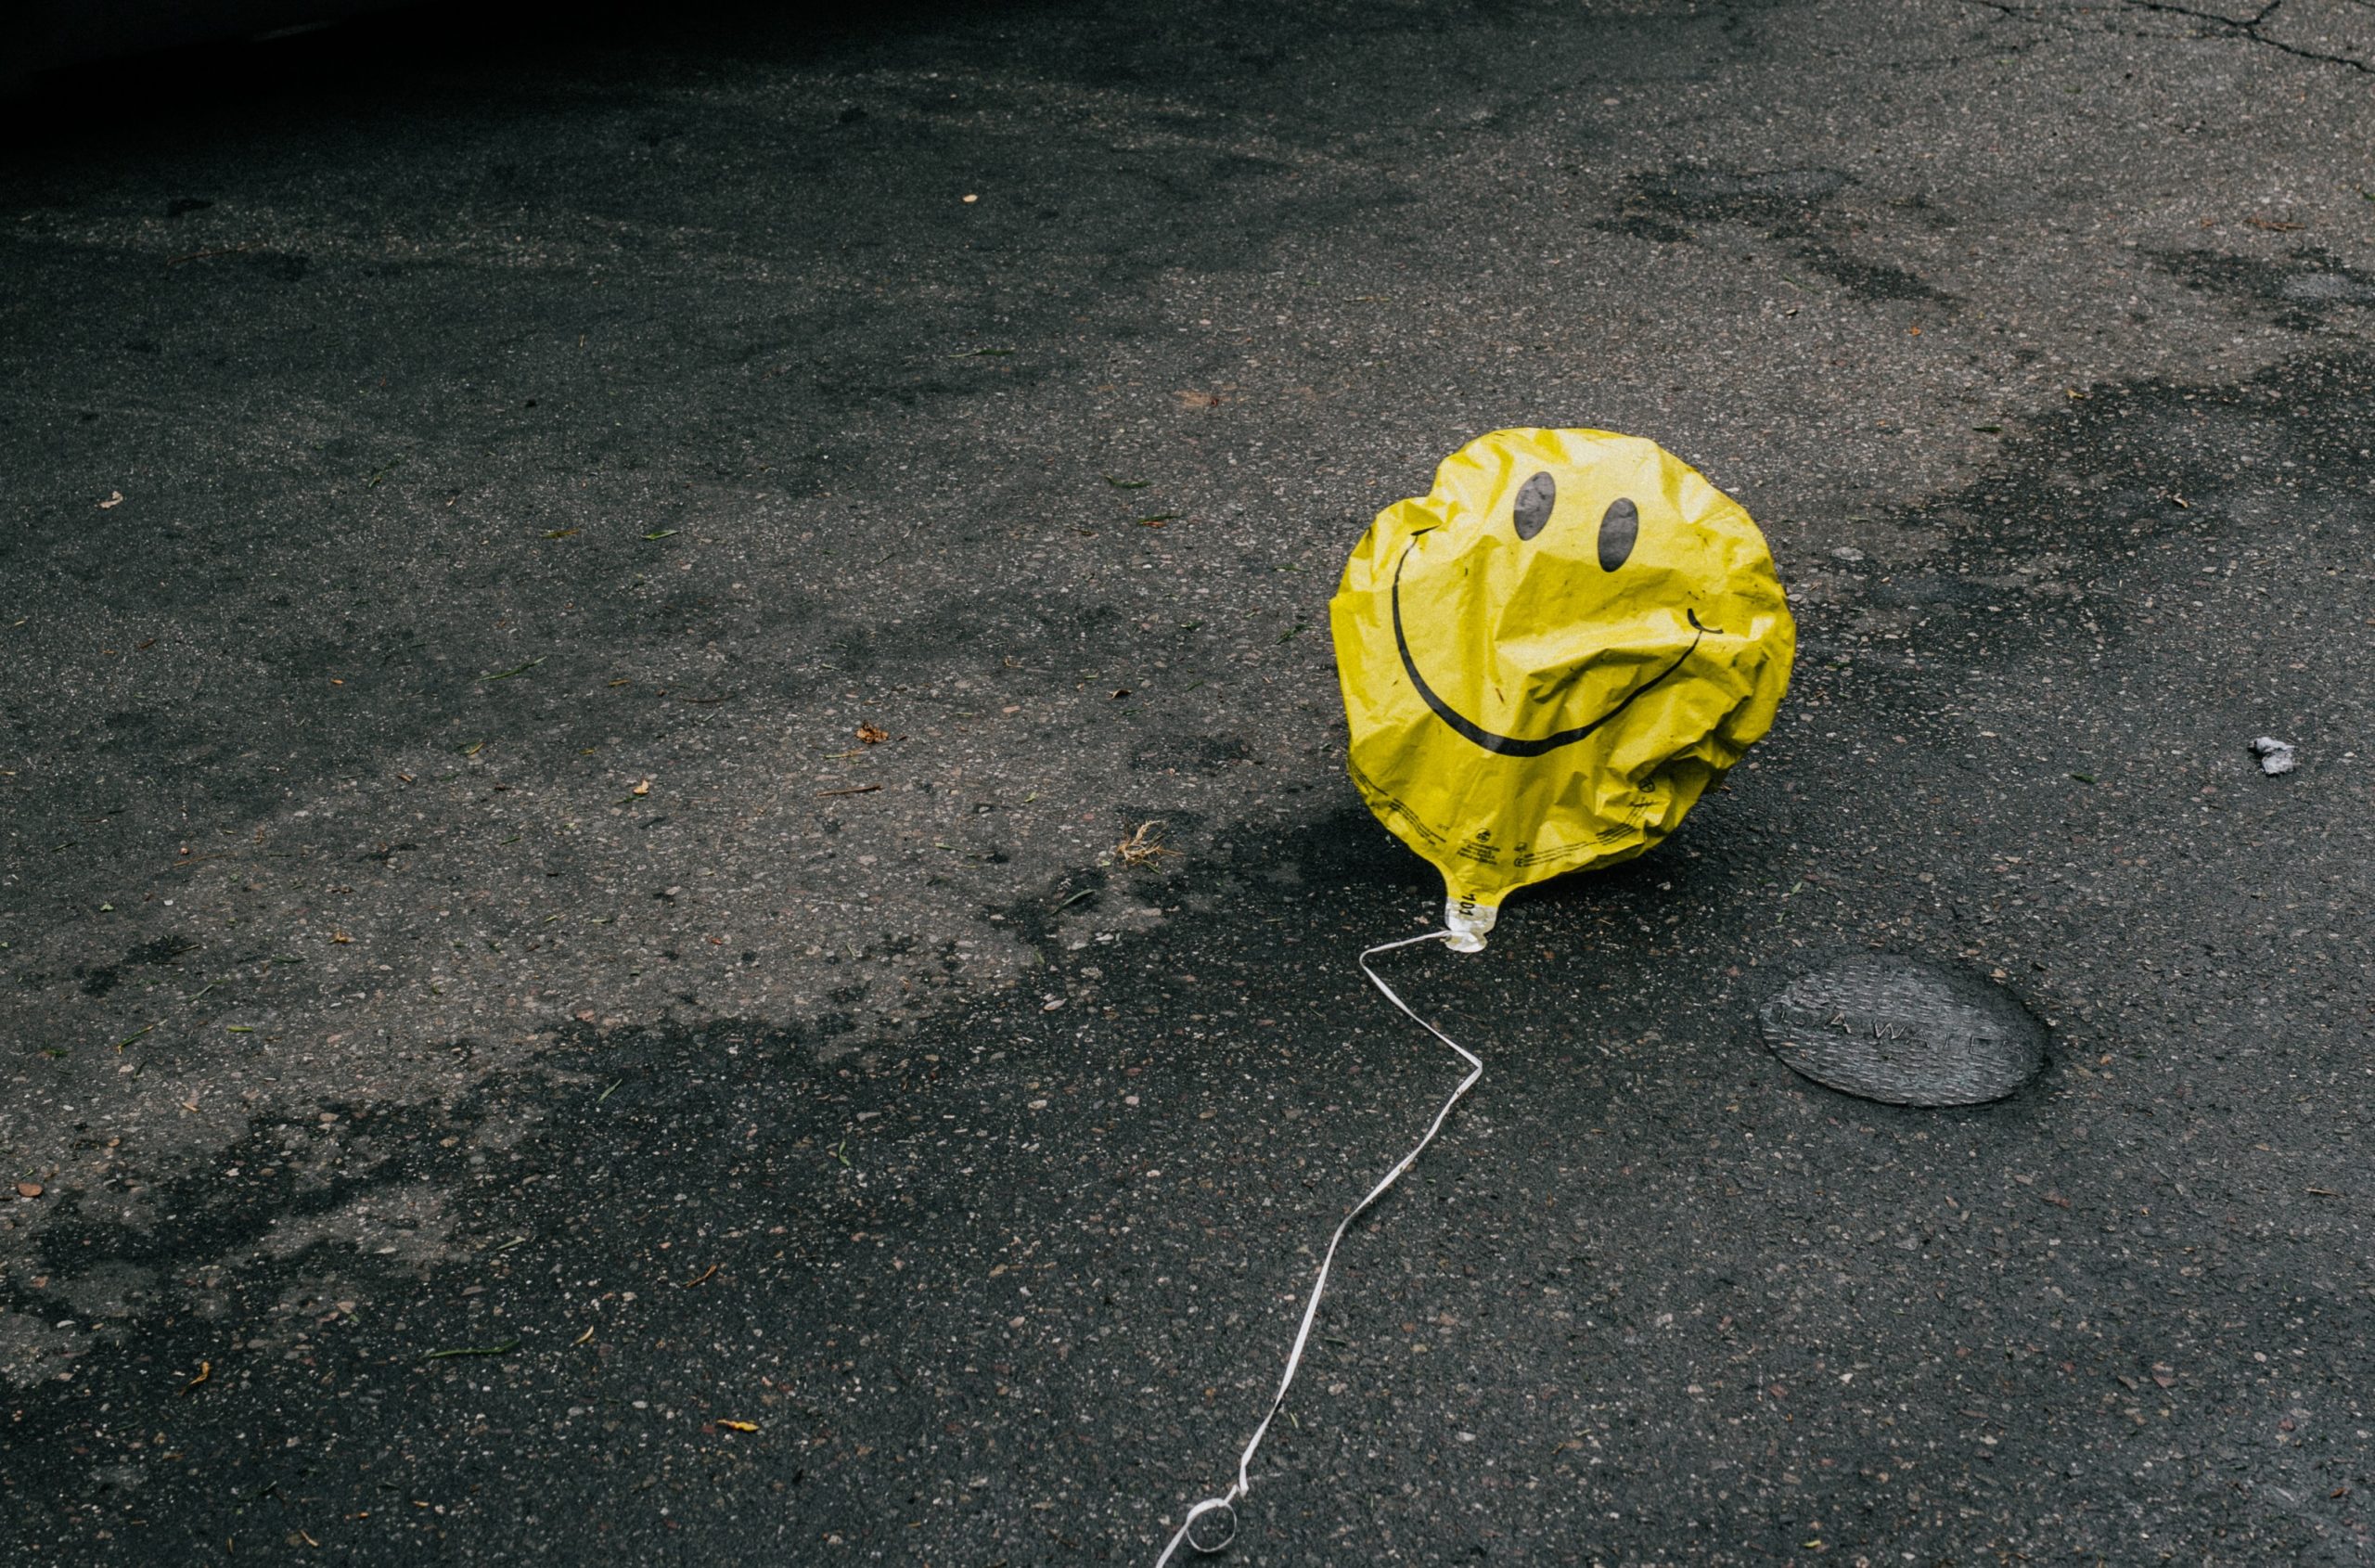 optimistic balloon in the face of an adversarial city street